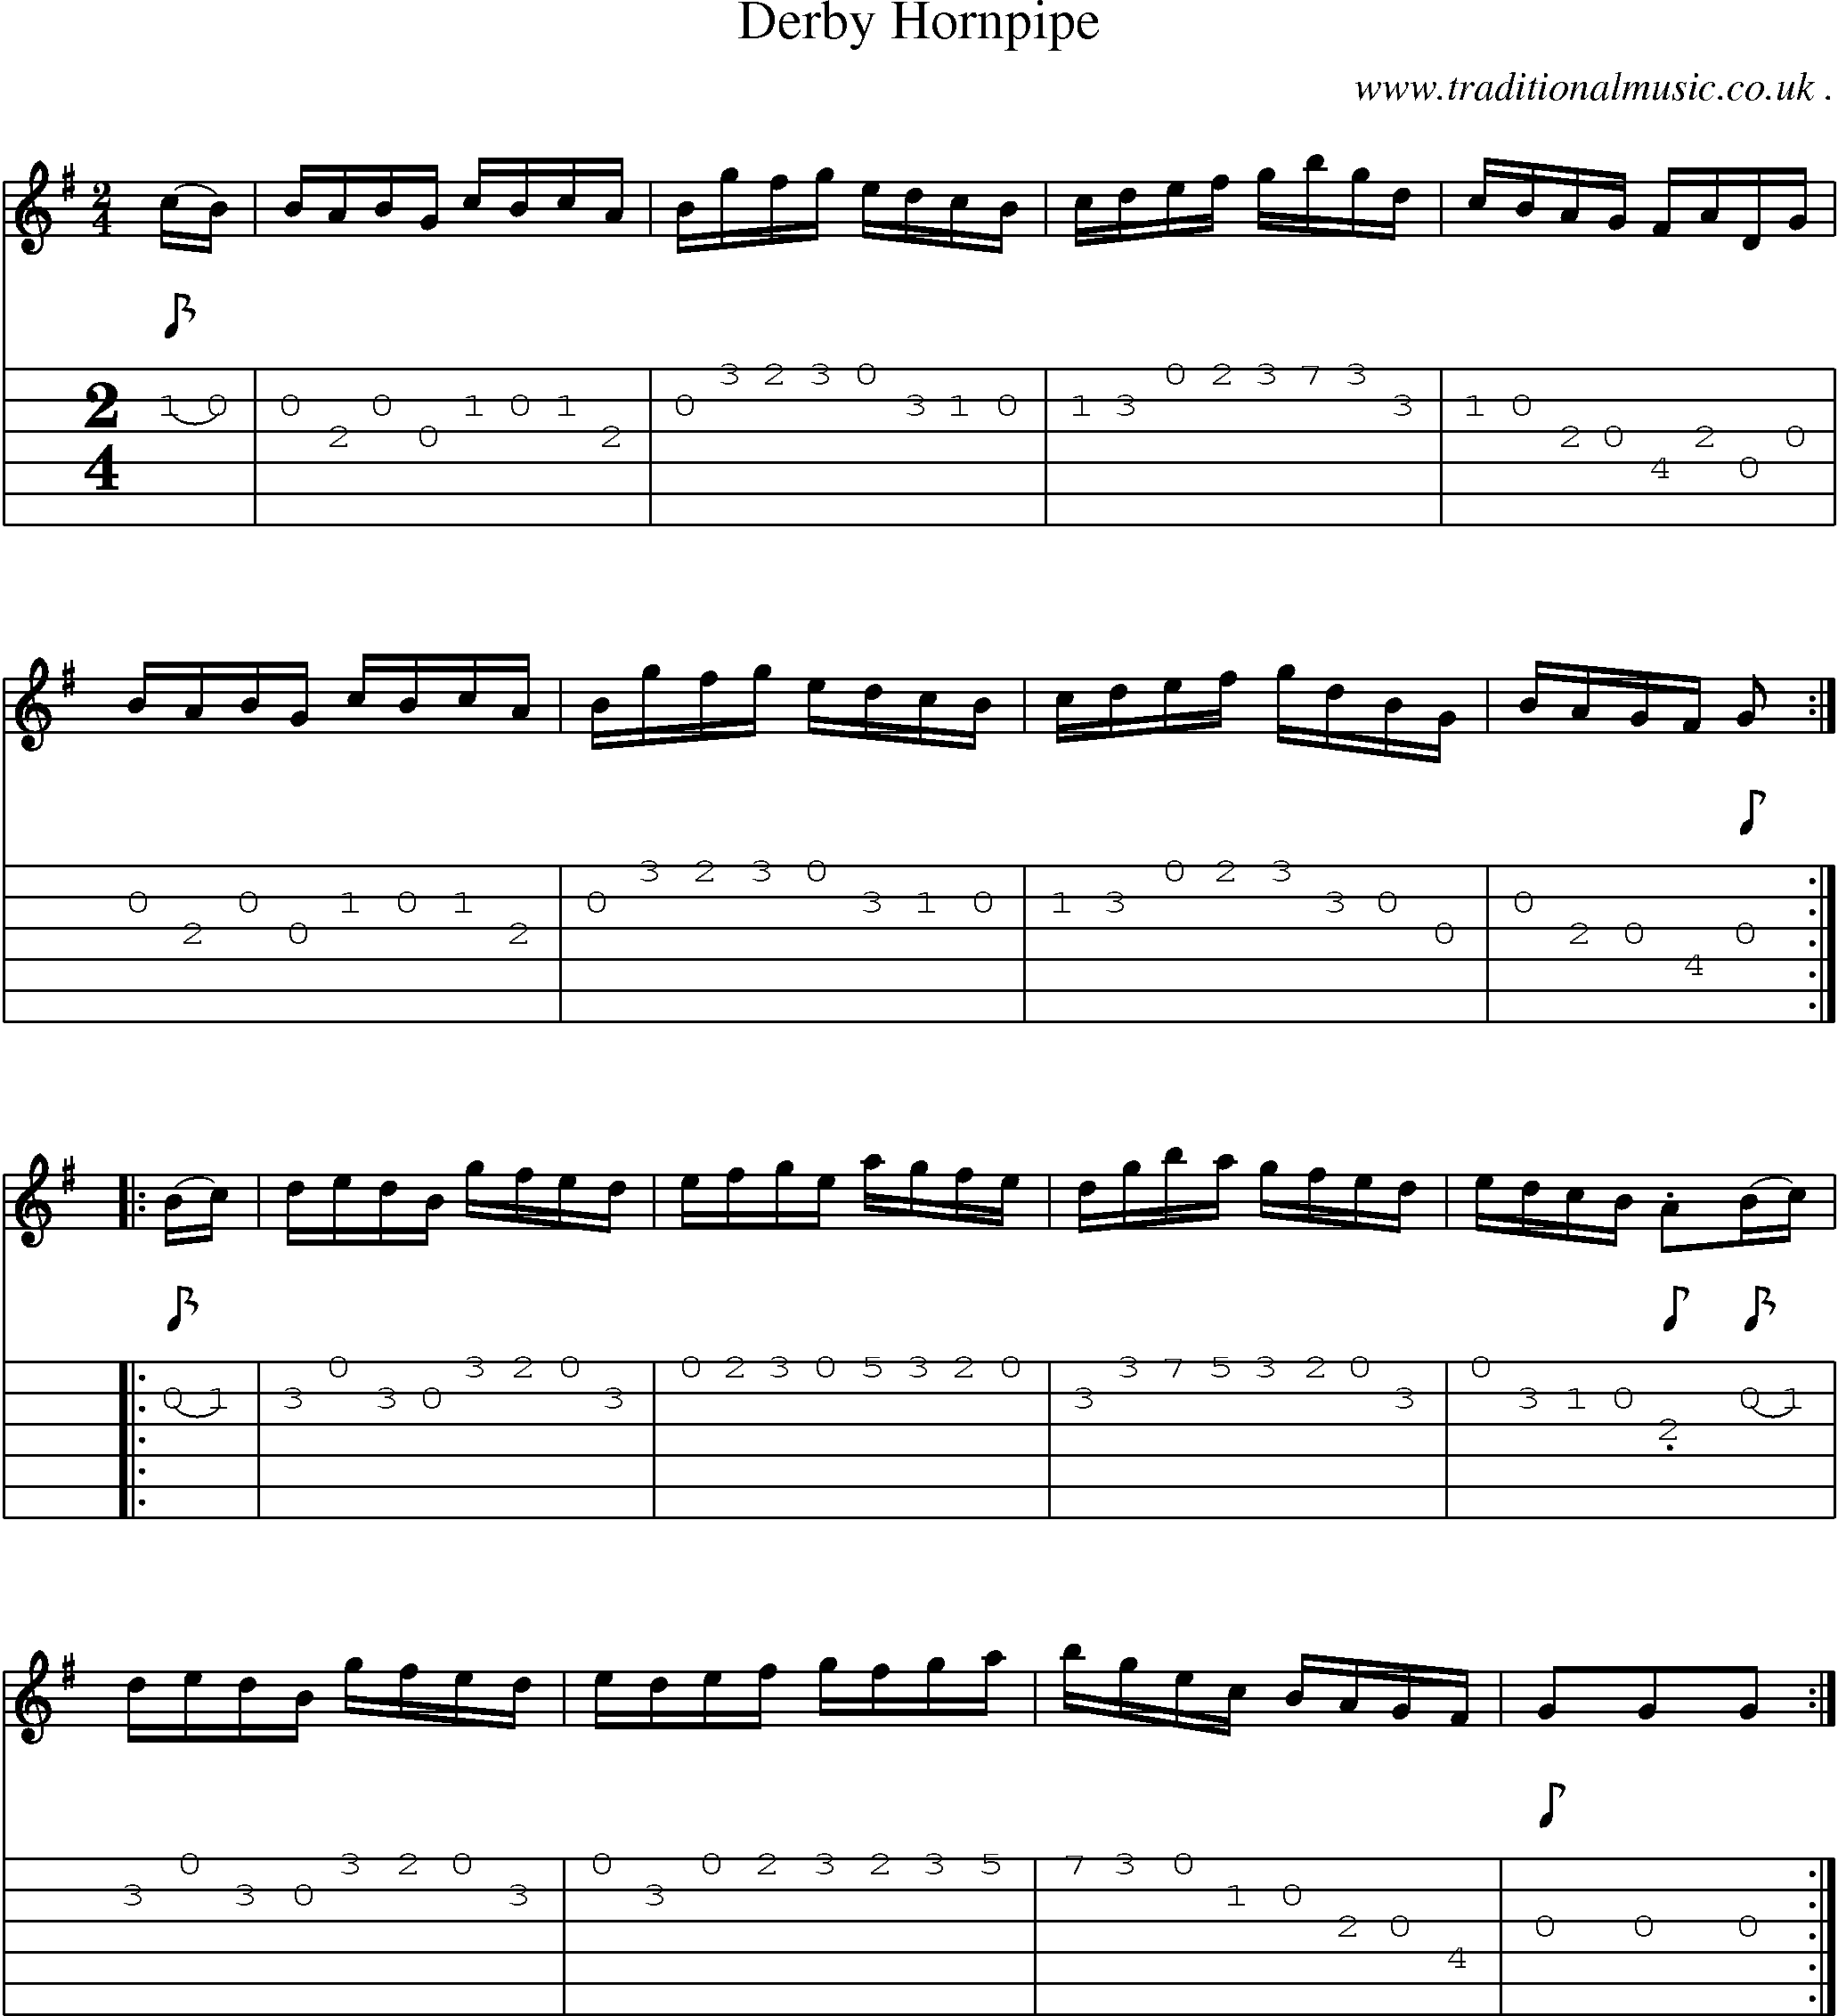 Sheet-Music and Guitar Tabs for Derby Hornpipe